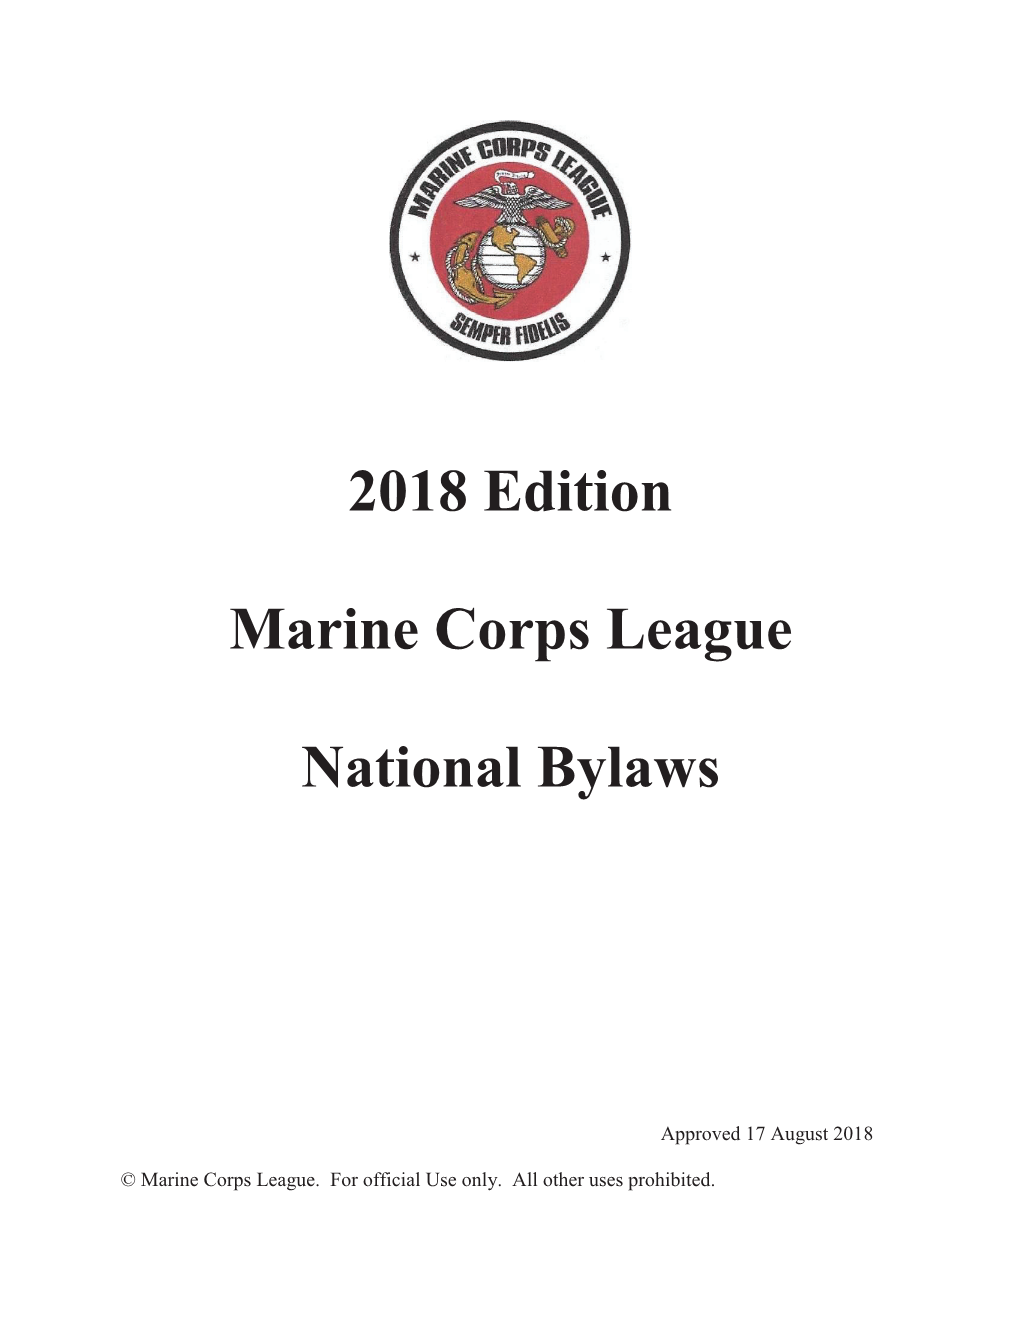 2018 Edition Marine Corps League National Bylaws